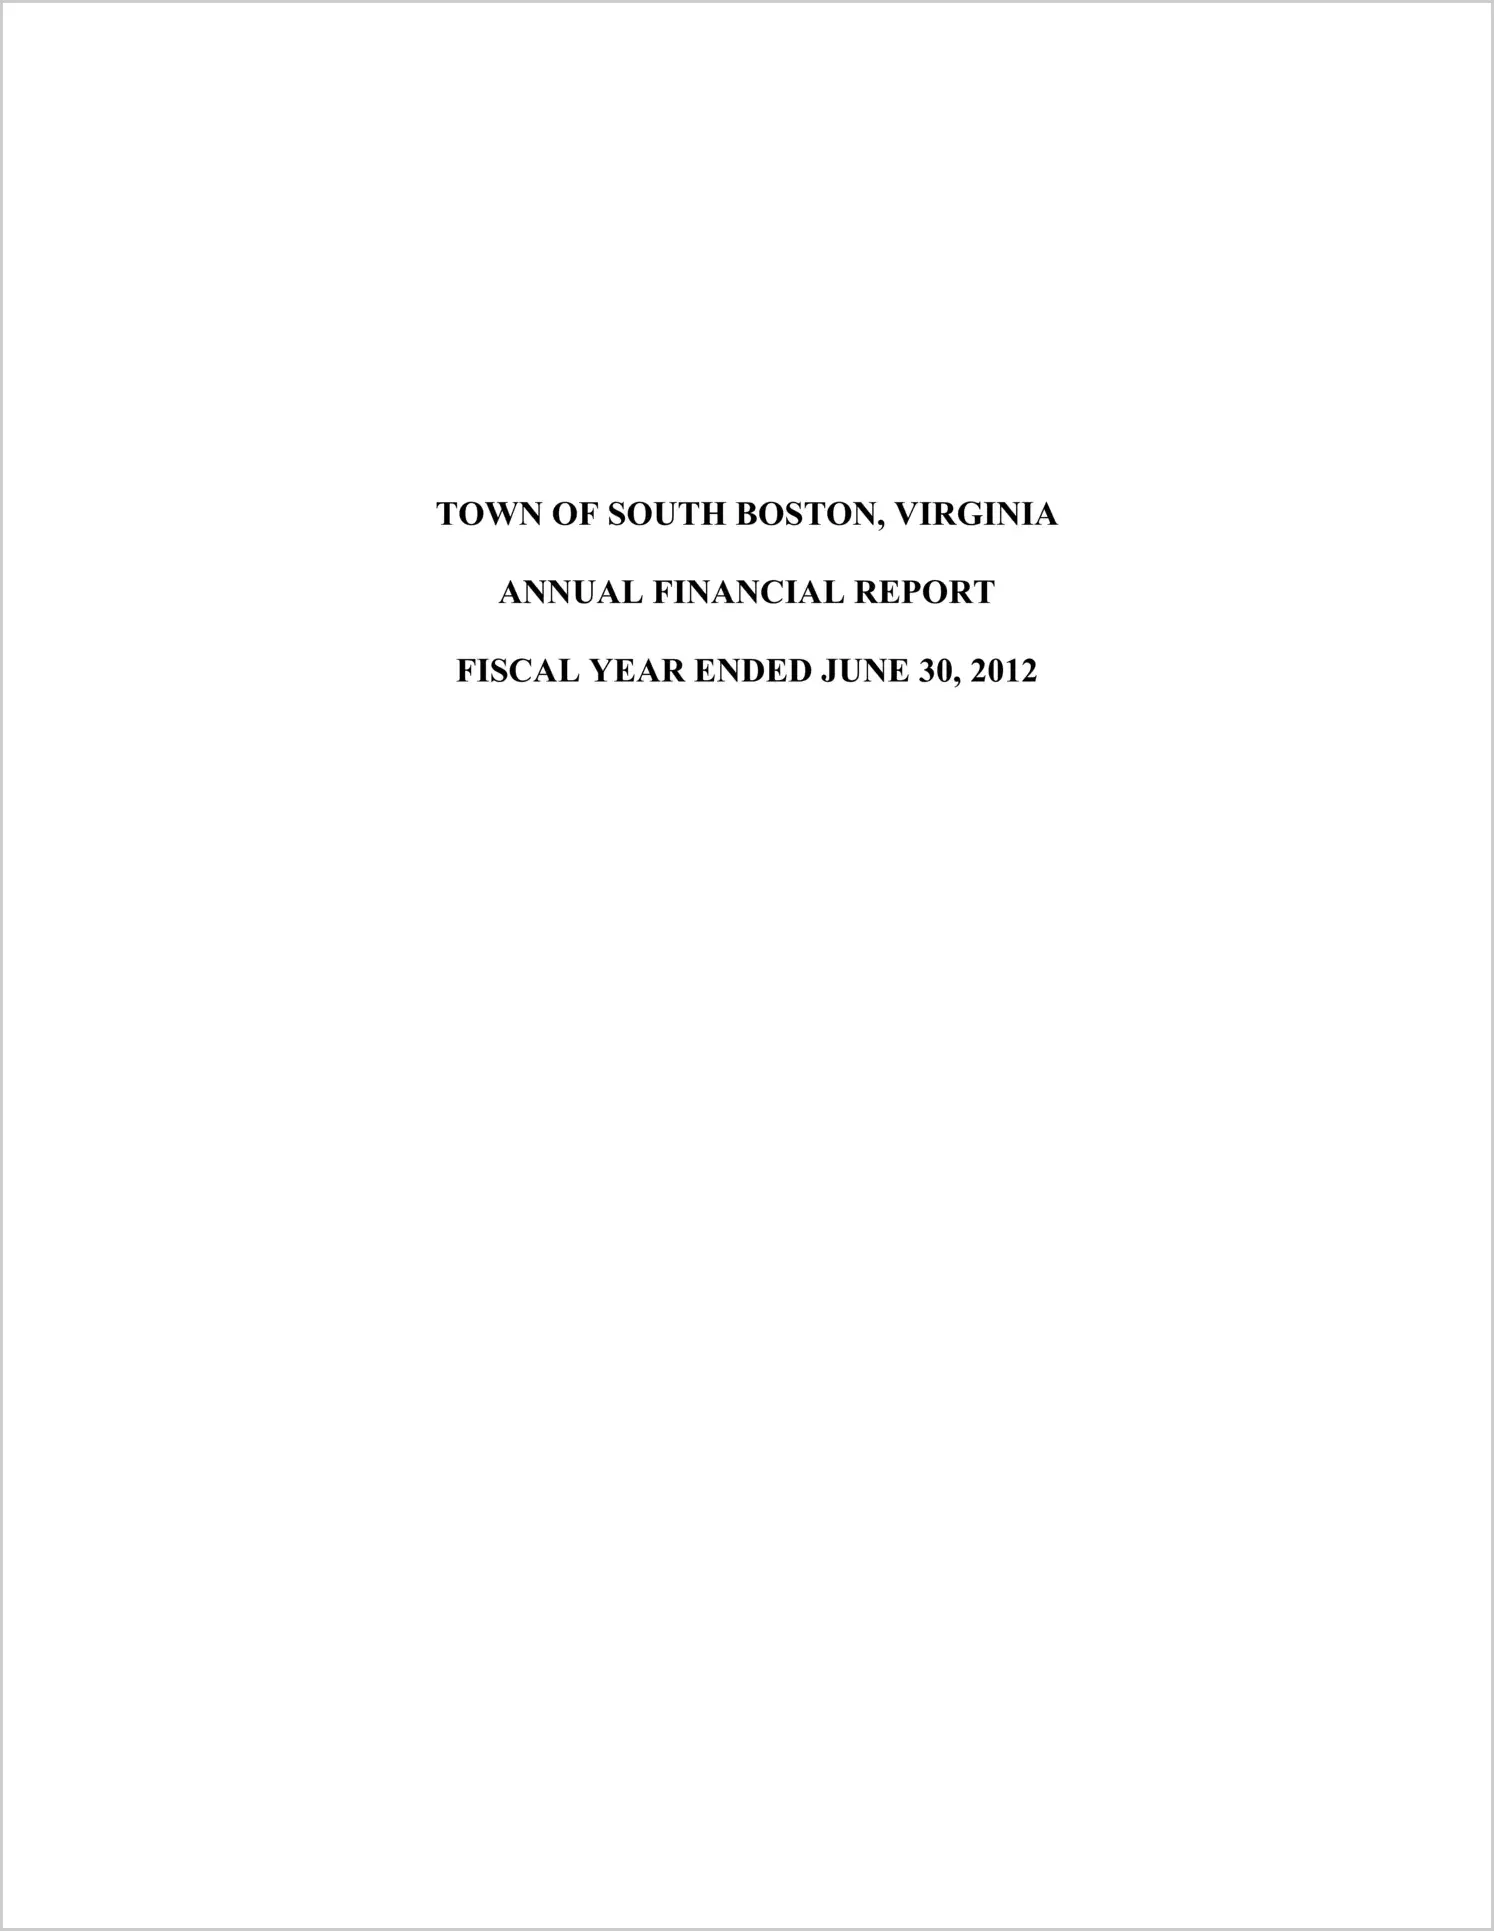 2012 Annual Financial Report for Town of South Boston